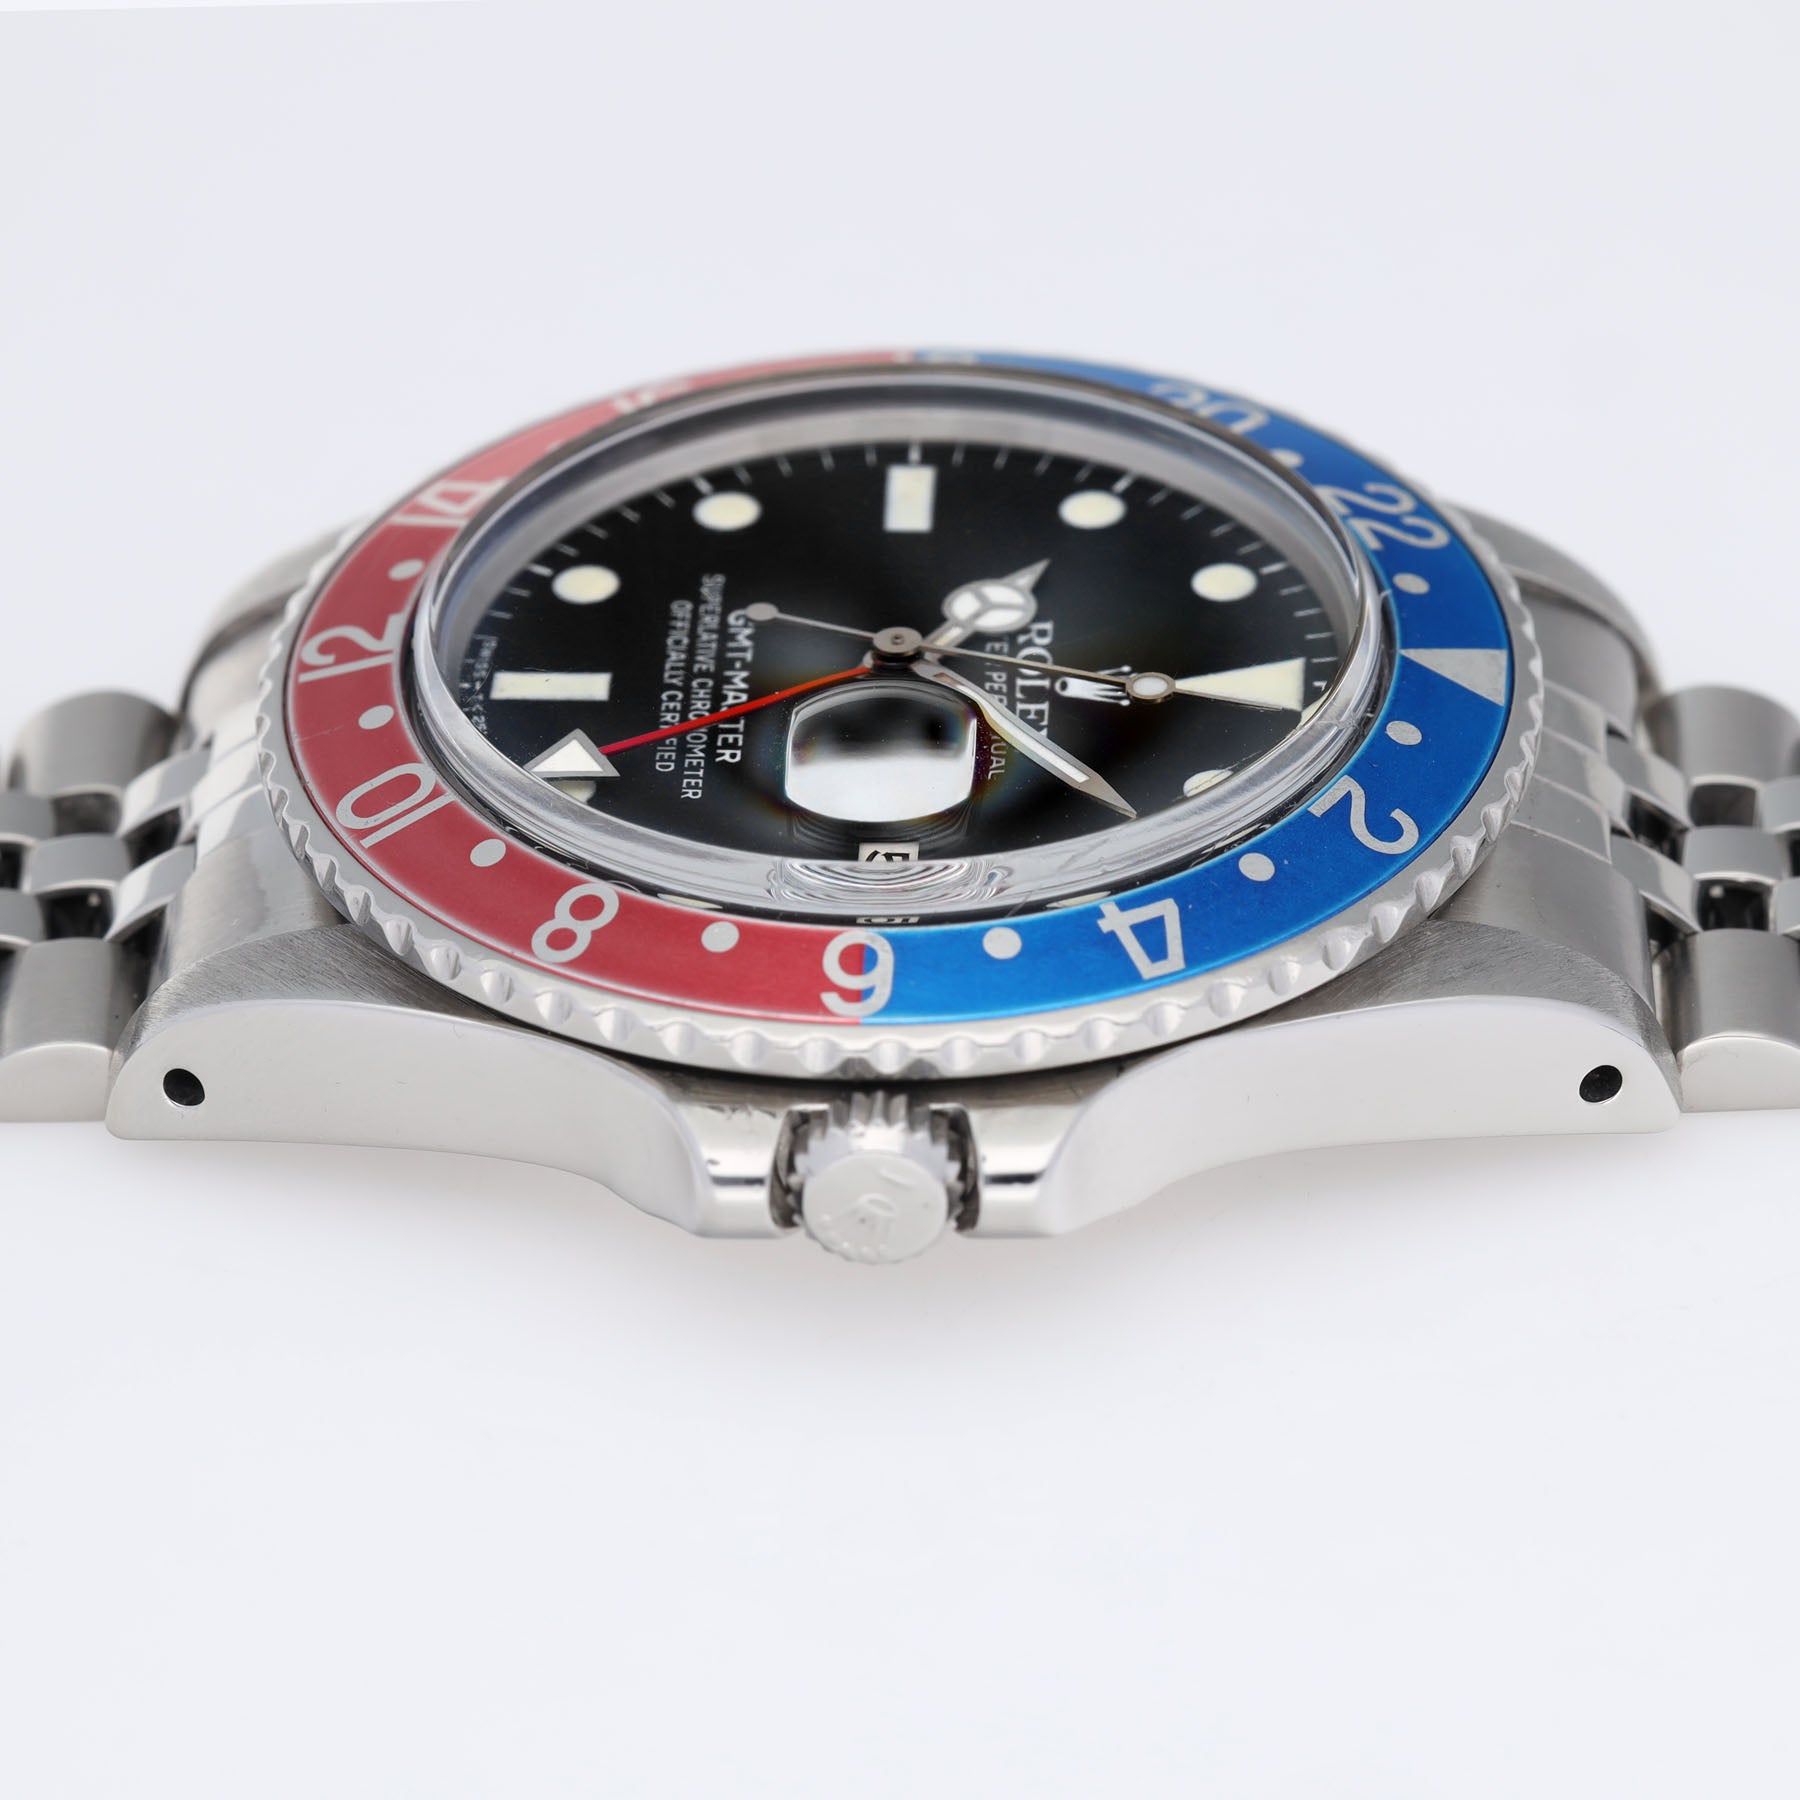 Rolex GMT-Master 16750 Matte Dial Curated package